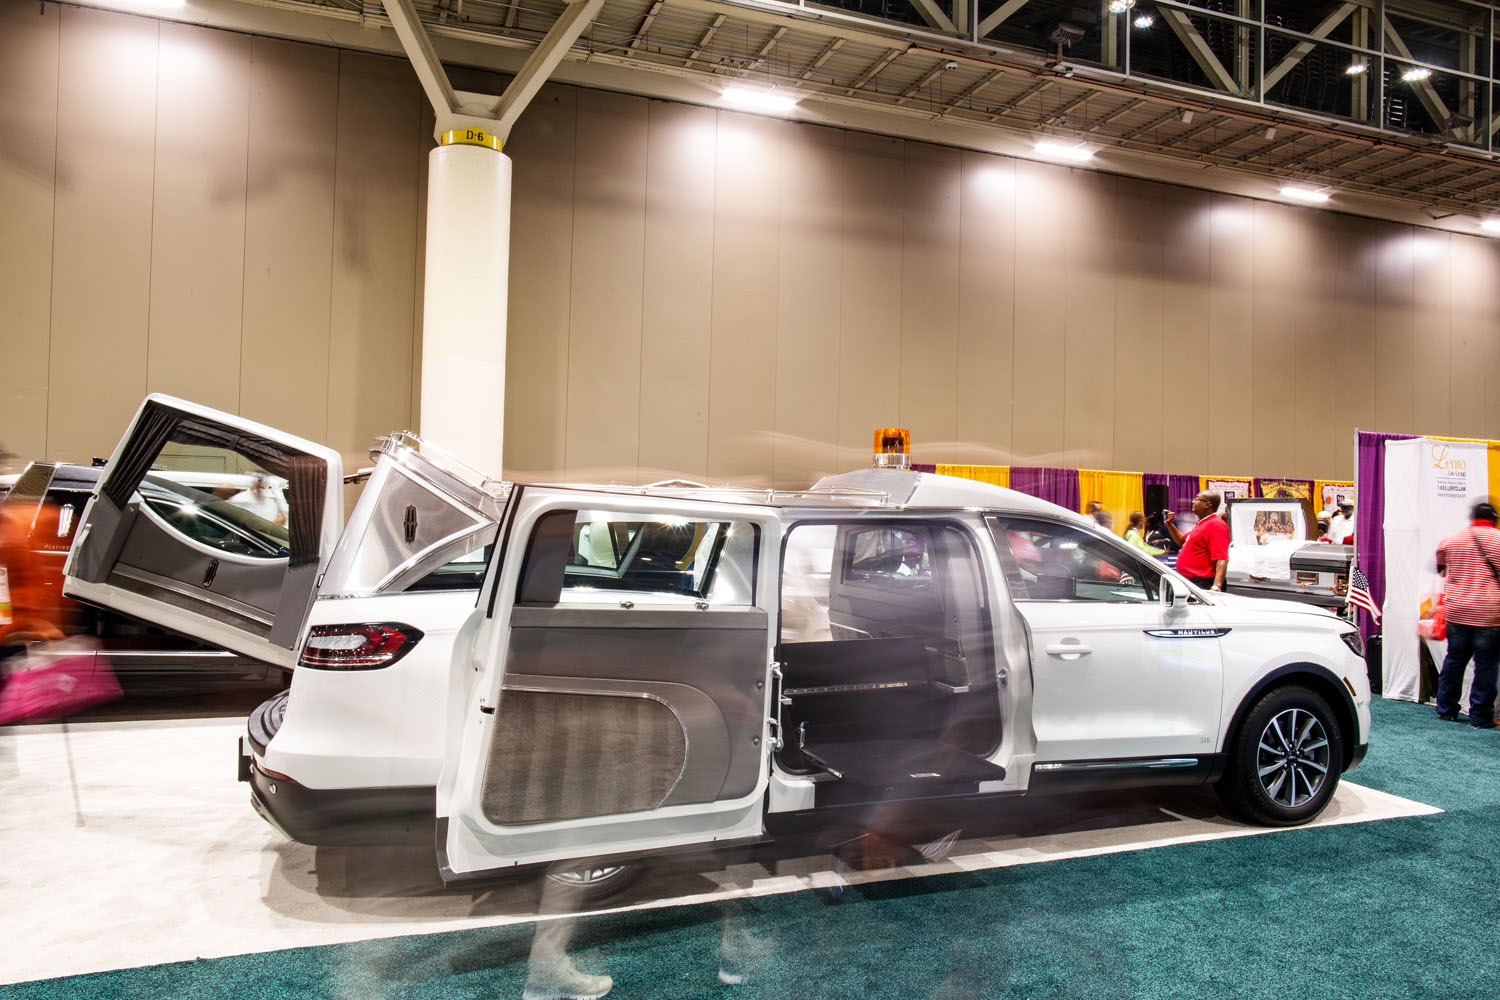 A hearse on display at NFDMA’s 85th Annual National Convention and Exposition. New Orleans, LA, August, 2022.